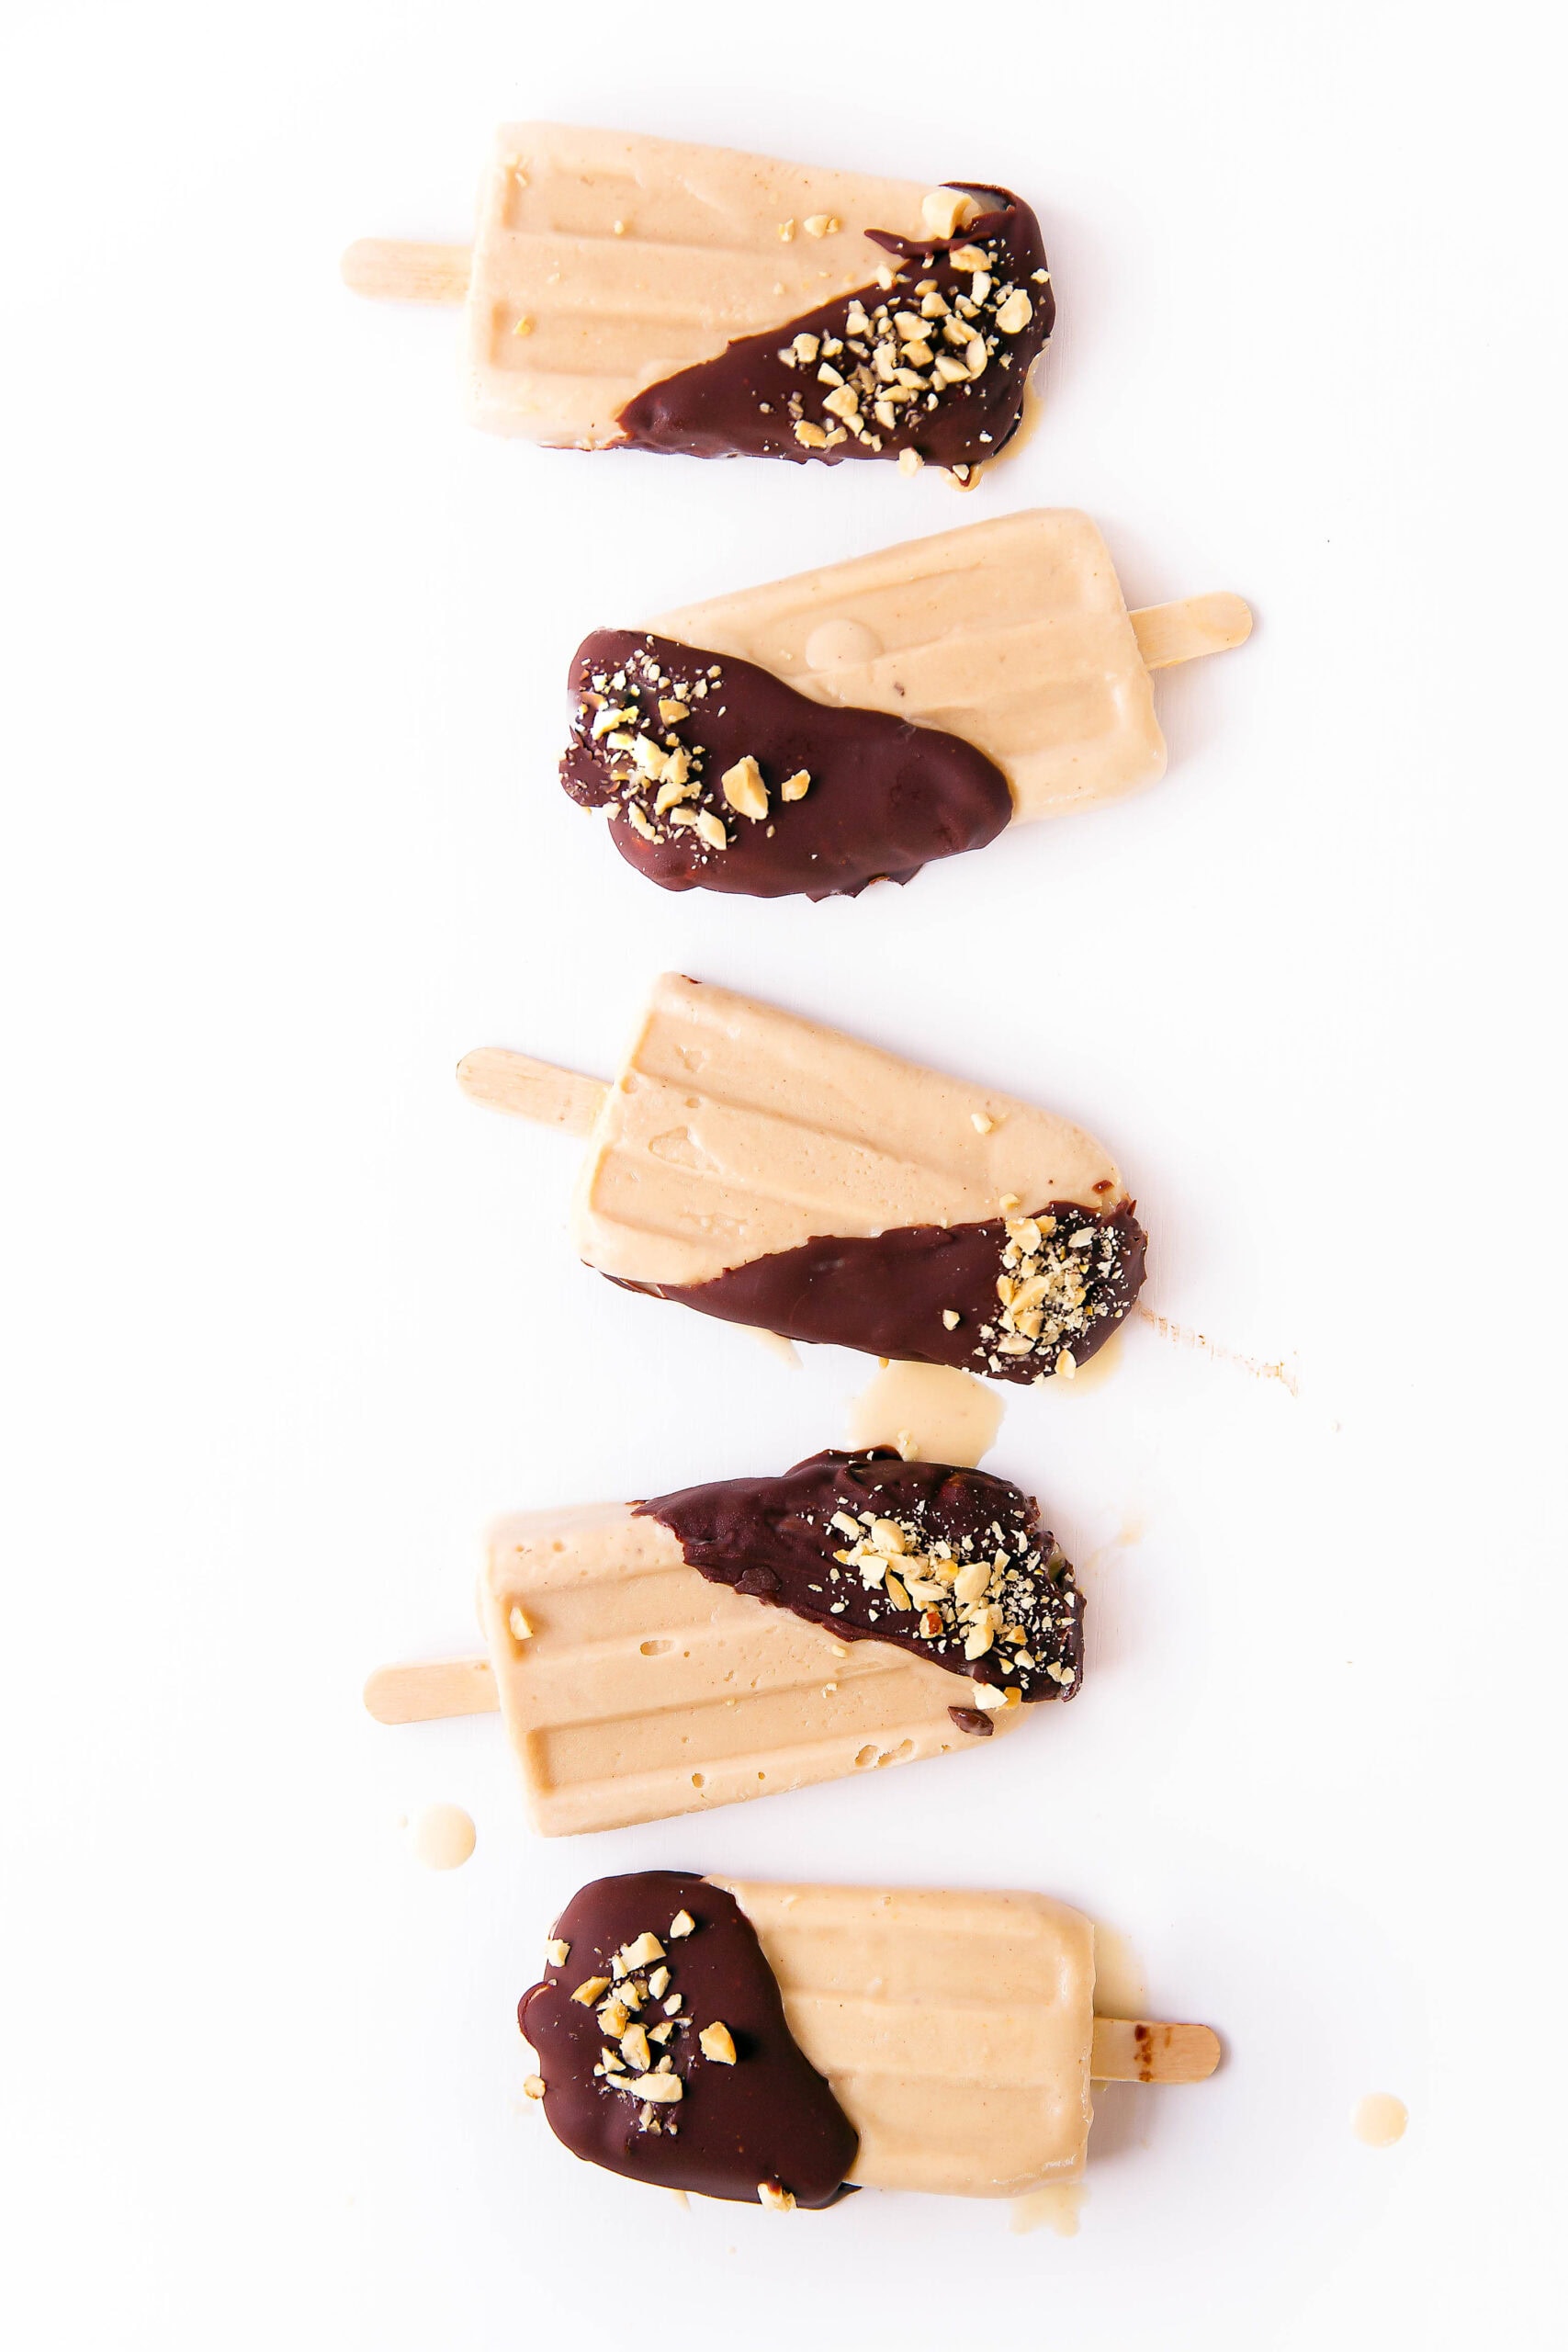 Elvis's favorite combo, peanut butter and banana, come together in popsicle form along with a sinful dip of chocolate in these Elvis Popsicles!